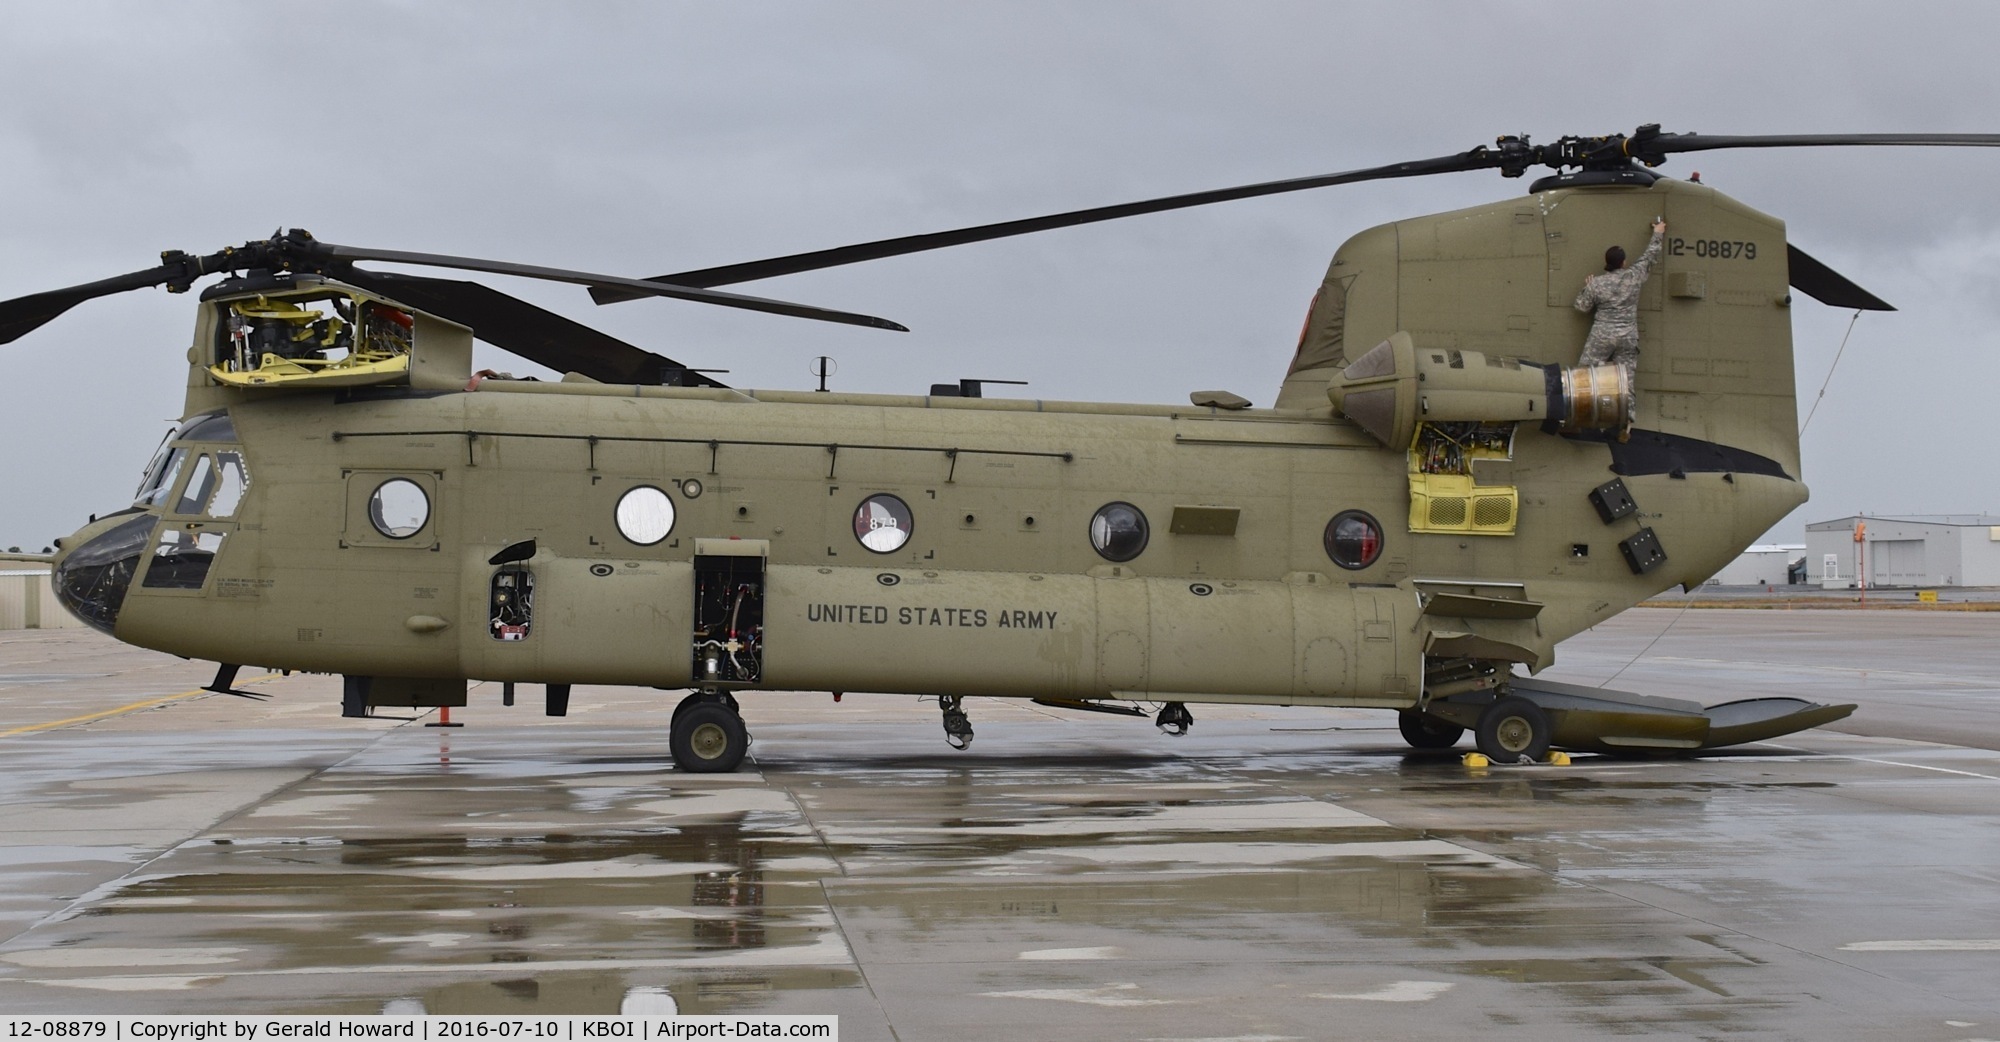 12-08879, 2012 Boeing CH-47F Chinook C/N M.8879, Parked on south GA ramp. No unit markings. Fresh from the factory?